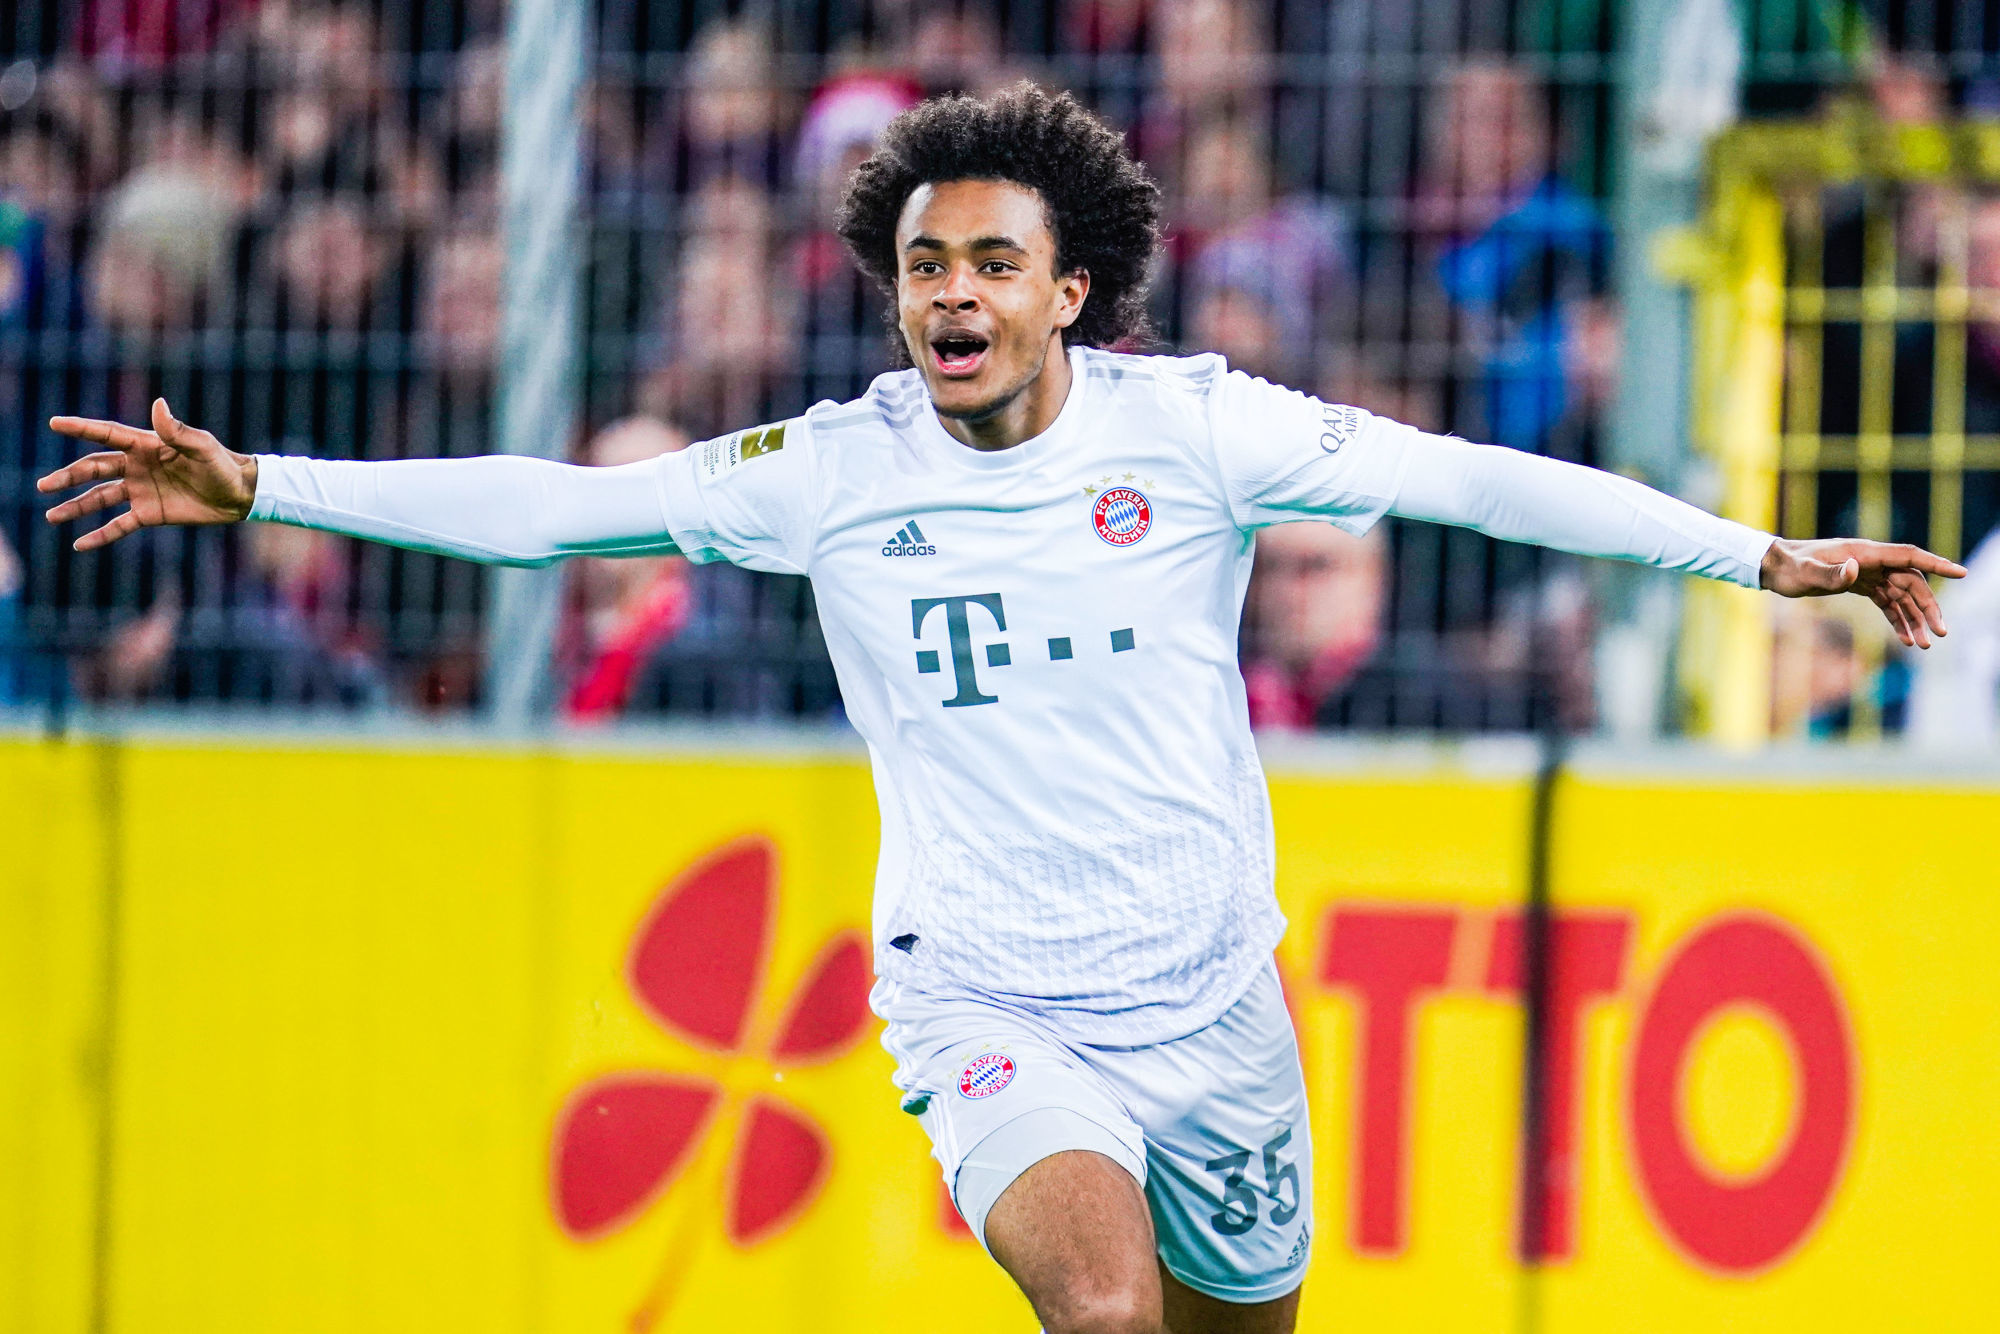 18 December 2019, Baden-Wuerttemberg, Freiburg im Breisgau: Soccer: Bundesliga, SC Freiburg - FC Bayern Munich, 16th matchday in the Black Forest Stadium. Munich's Joshua Zirkzee cheers over the goal to 1:2. Photo: Uwe Anspach/dpa - IMPORTANT NOTE: In accordance with the requirements of the DFL Deutsche Fu?ball Liga or the DFB Deutscher Fu?ball-Bund, it is prohibited to use or have used photographs taken in the stadium and/or the match in the form of sequence images and/or video-like photo sequences. 

Photo by Icon Sport - Joshua ZIRKZEE - Schwarzwald-Stadion  - Fribourg (Allemagne)